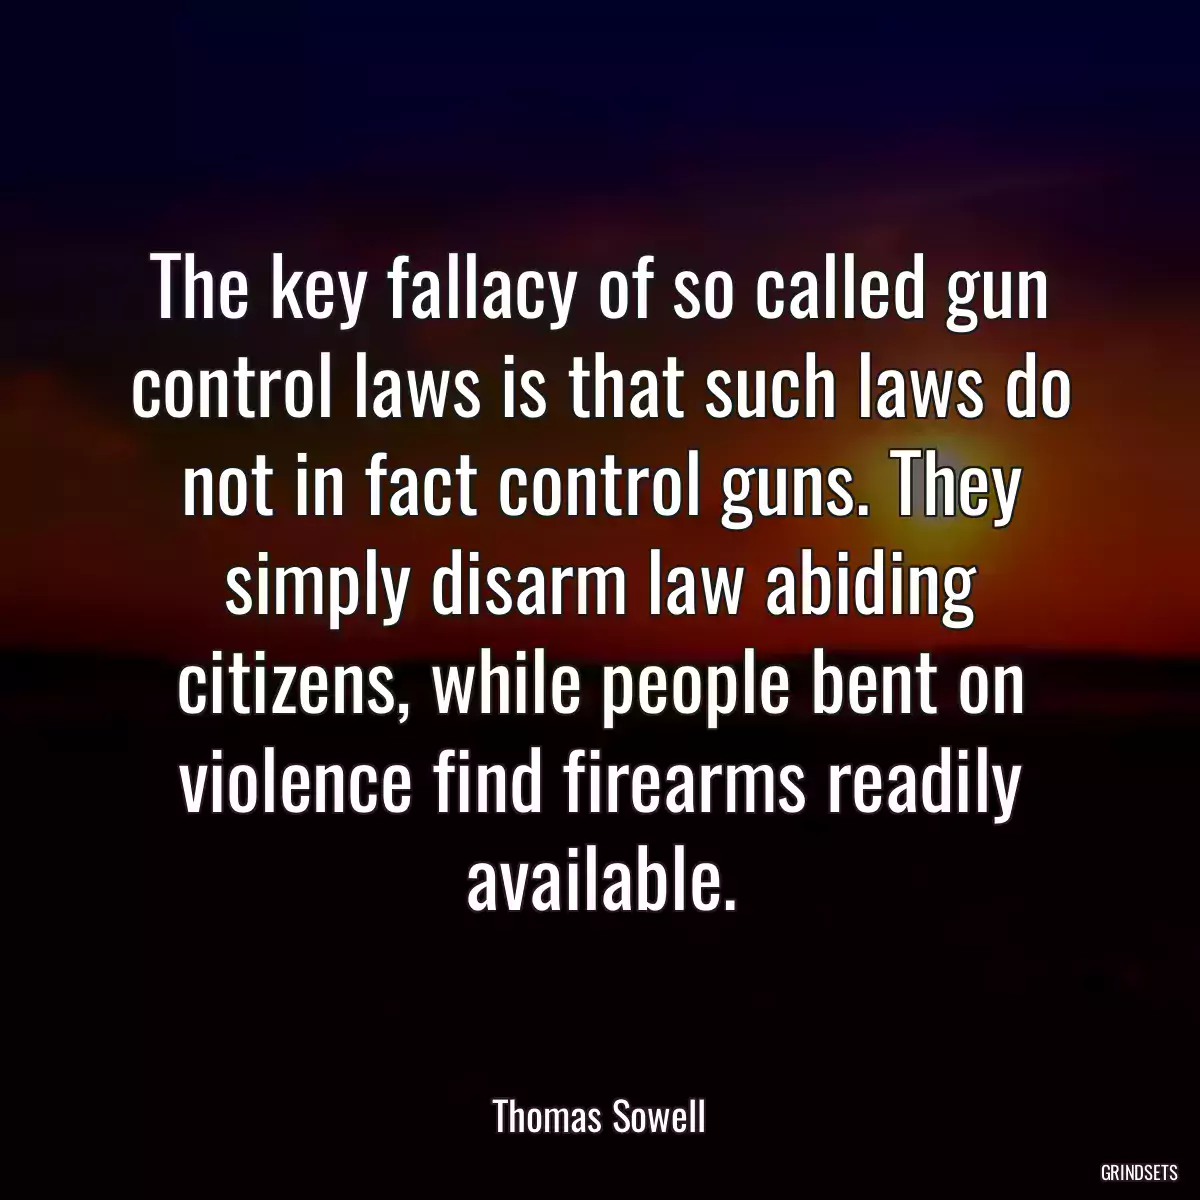 The key fallacy of so called gun control laws is that such laws do not in fact control guns. They simply disarm law abiding citizens, while people bent on violence find firearms readily available.